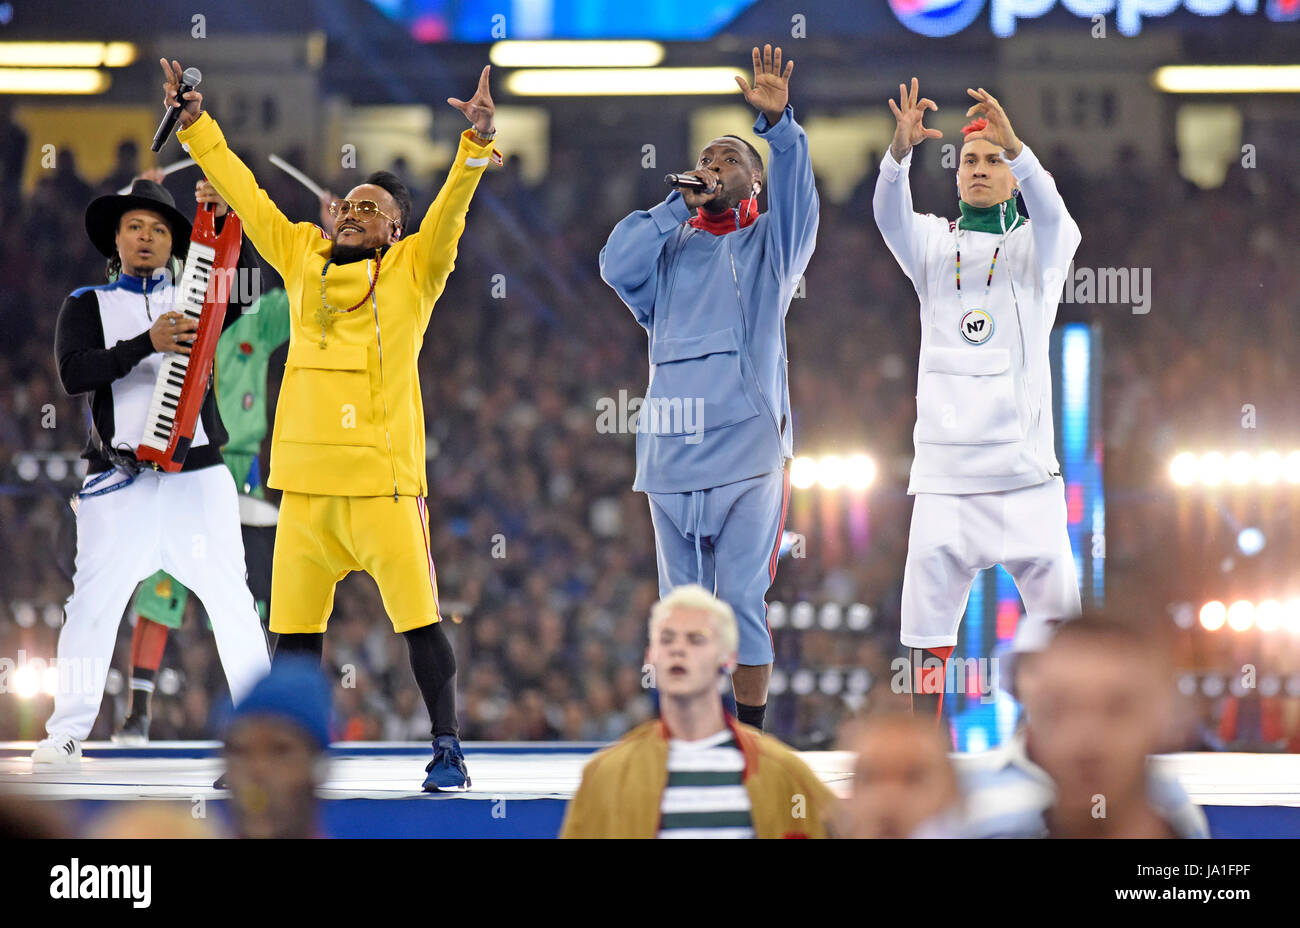 Cardiff, UK. 04th June, 2017. The Black Eyed Peas performing ahead of kick  off at the UEFA Champions League Final between Juventus and Real Madrid CF  at the National Stadium of Wales